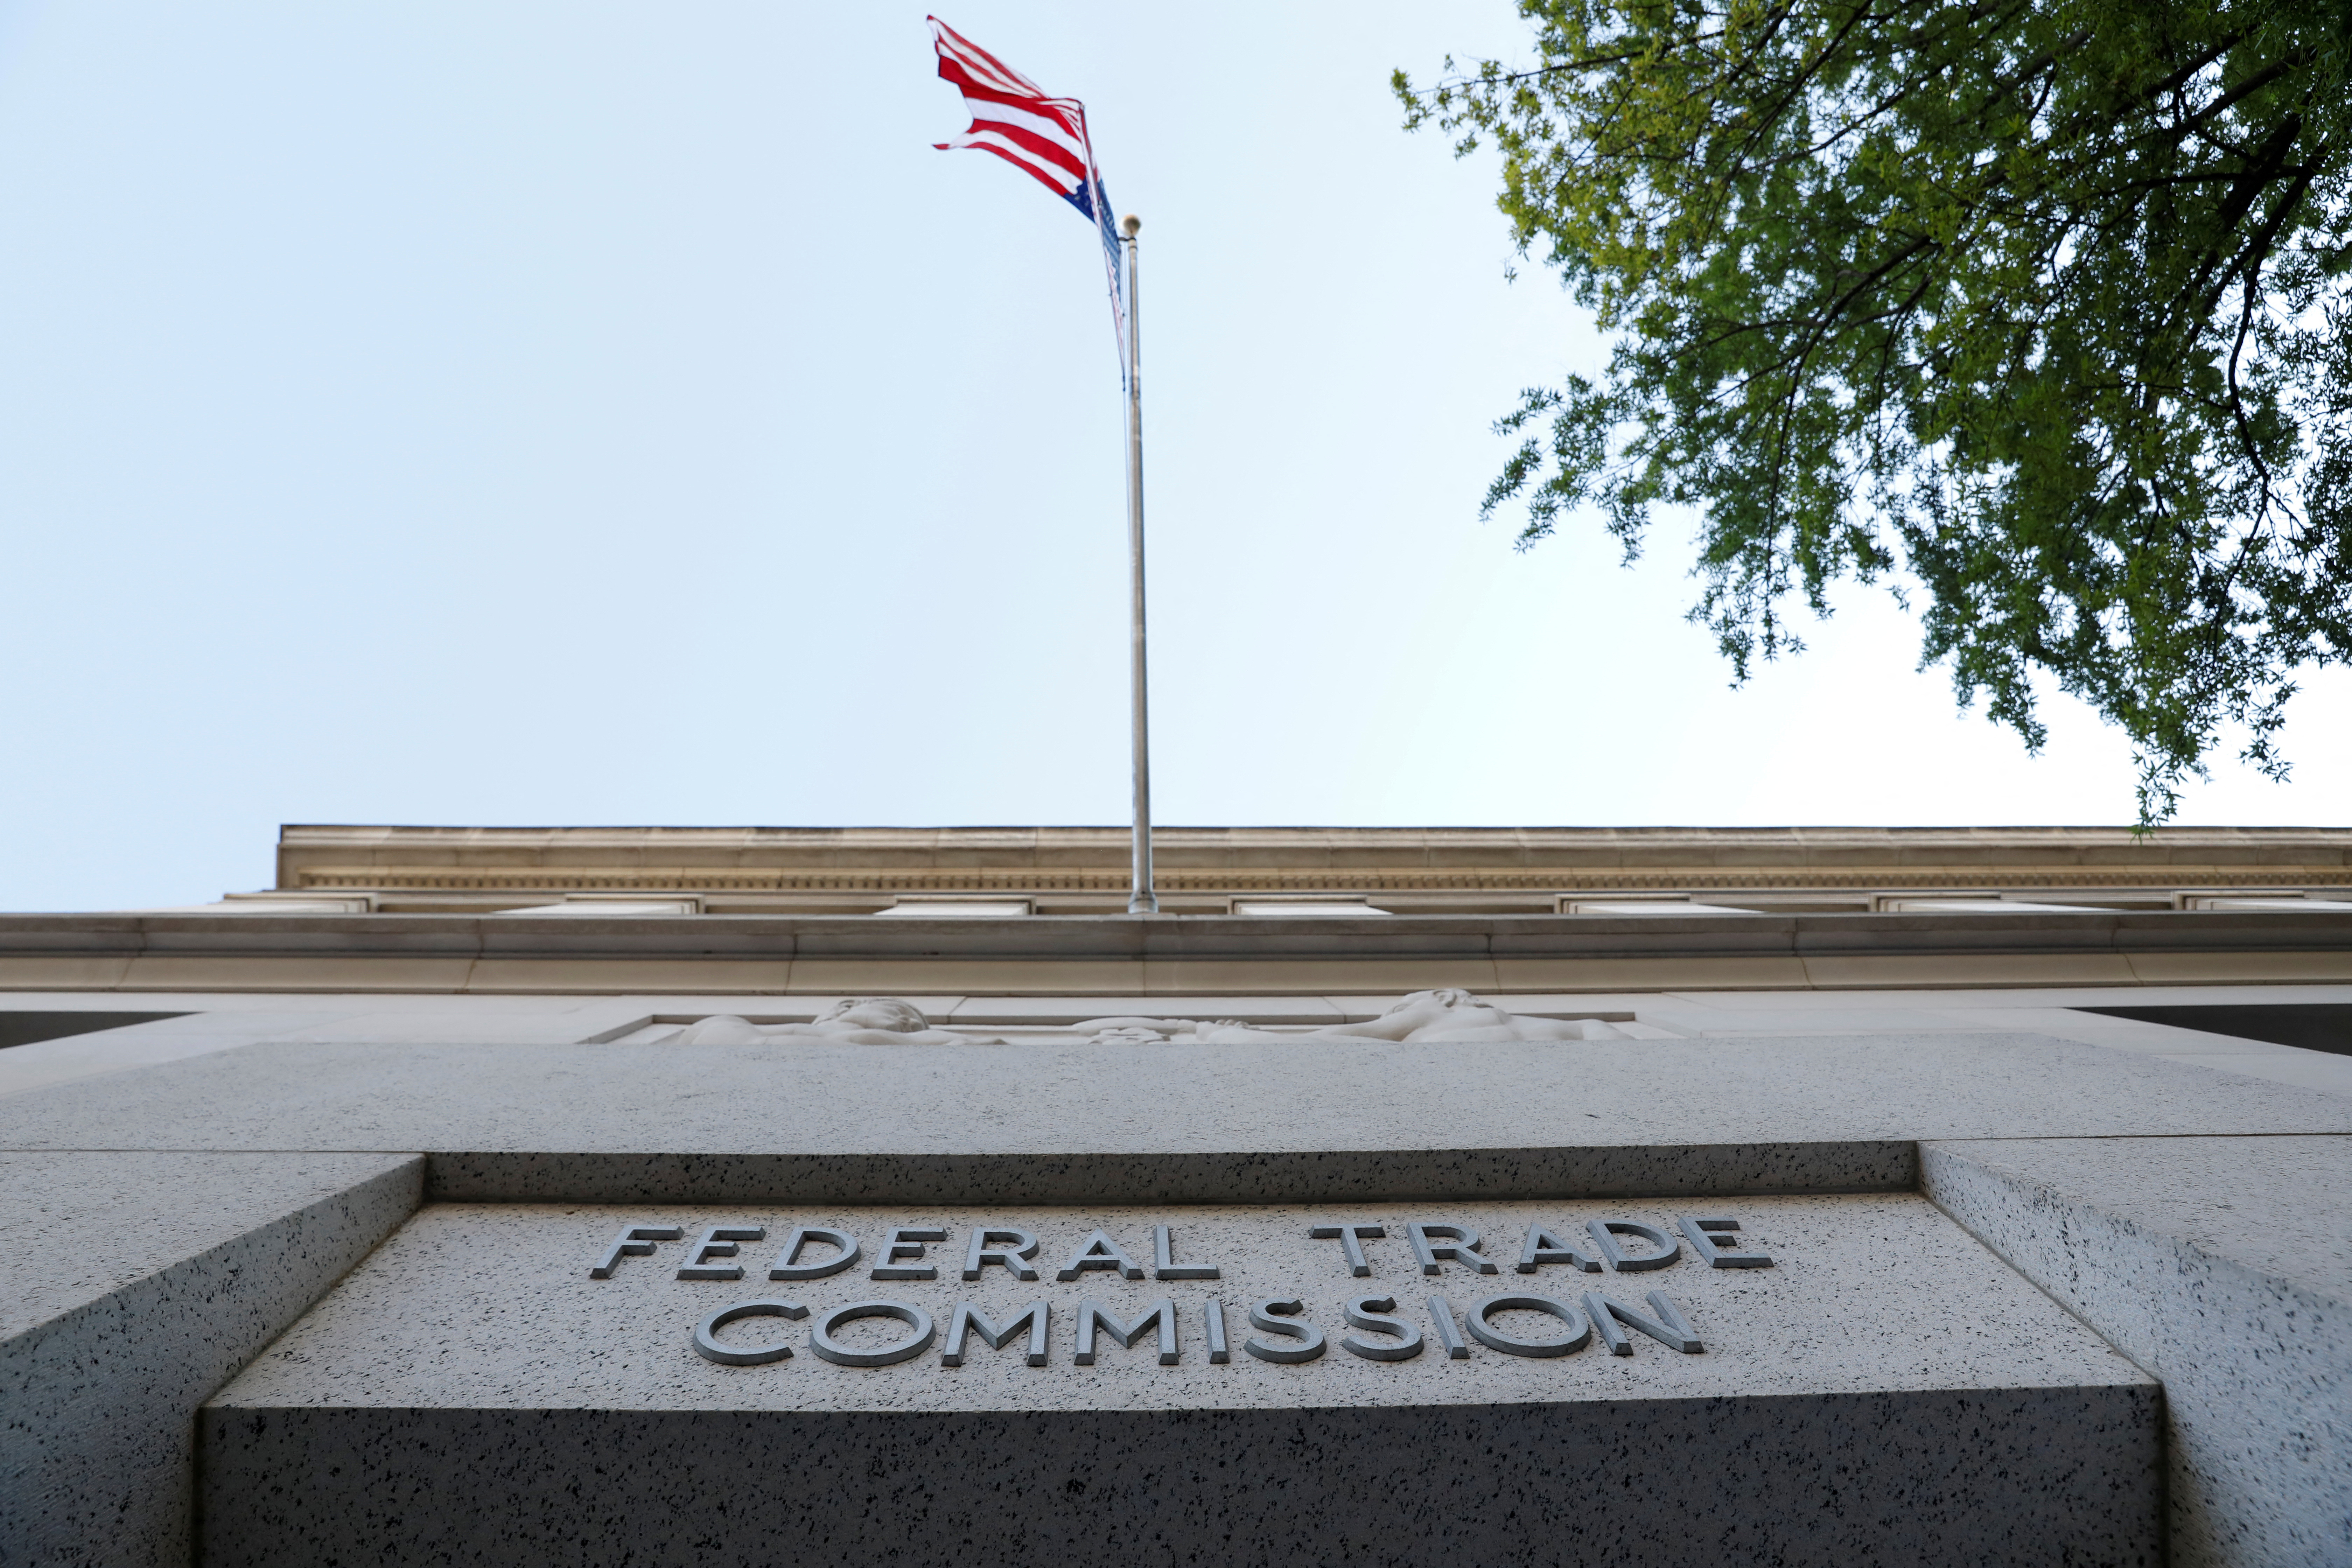 Signage is seen at the Federal Trade Commission headquarters in Washington, D.C.